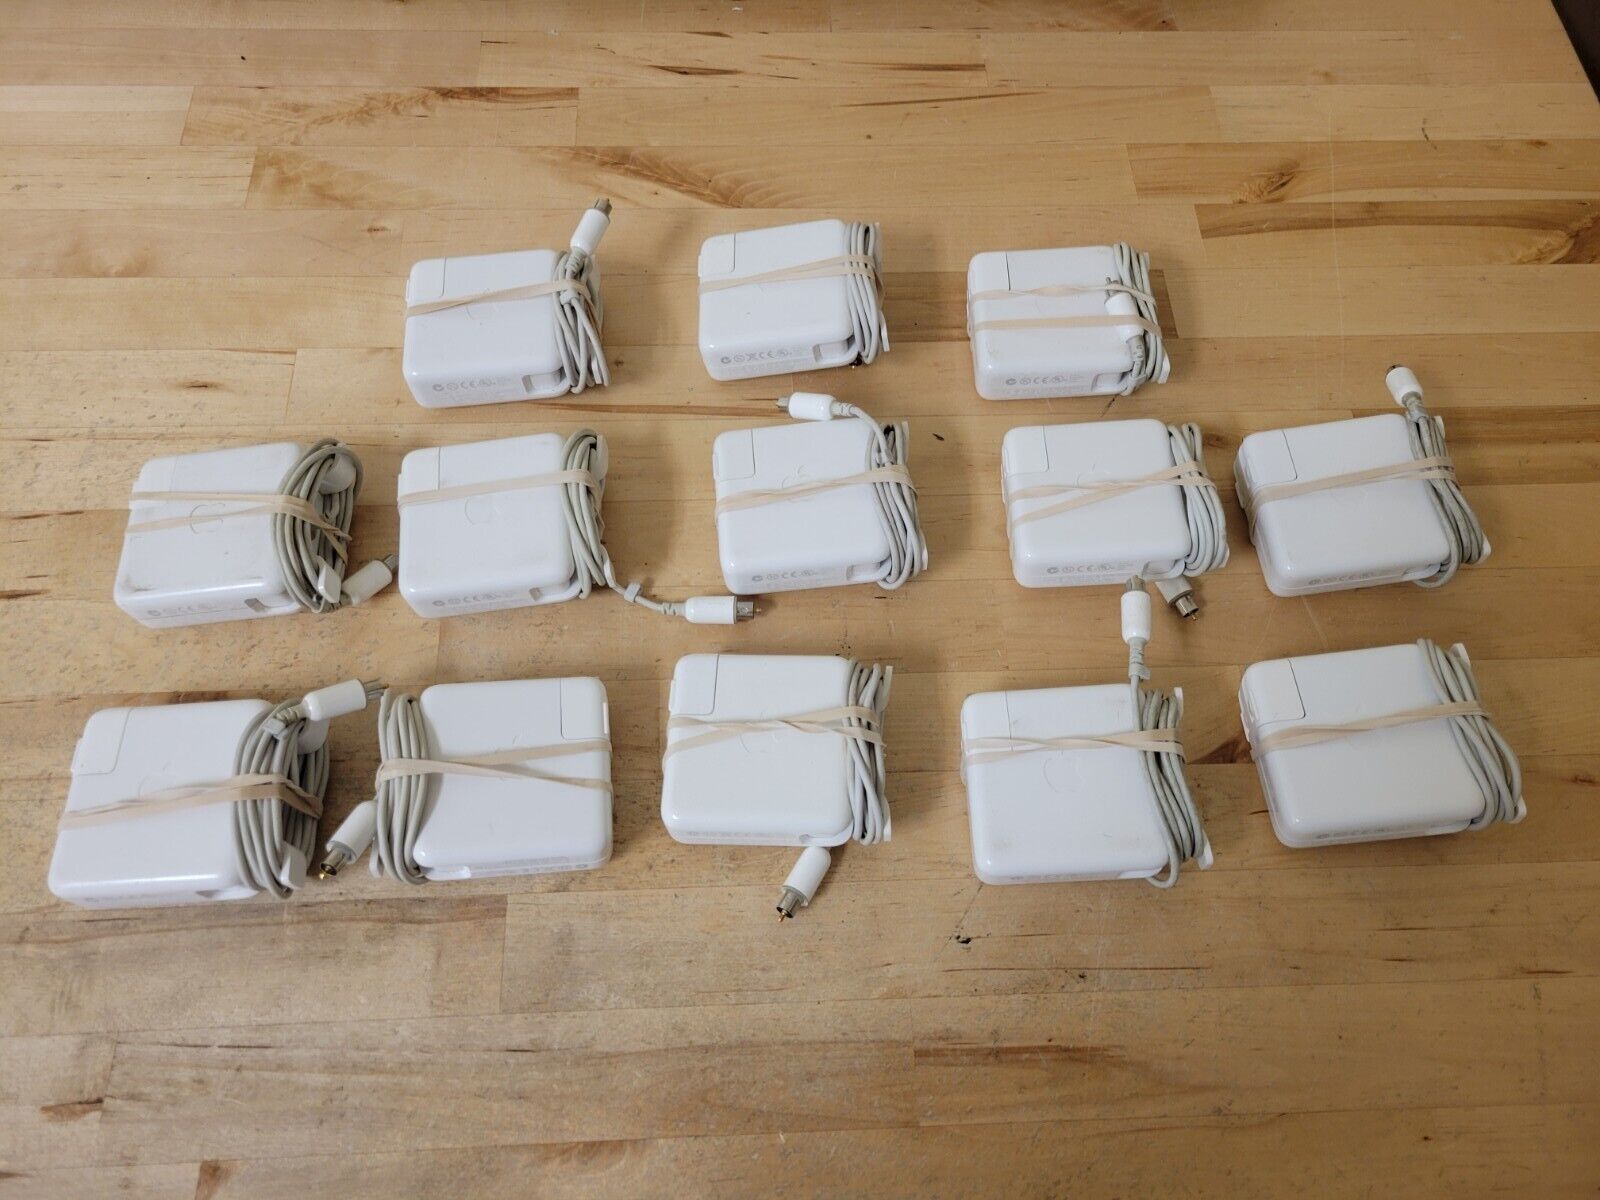 Lot of 13 Apple A1021 iBook PowerBook 65W Power Adapter Charger Lot